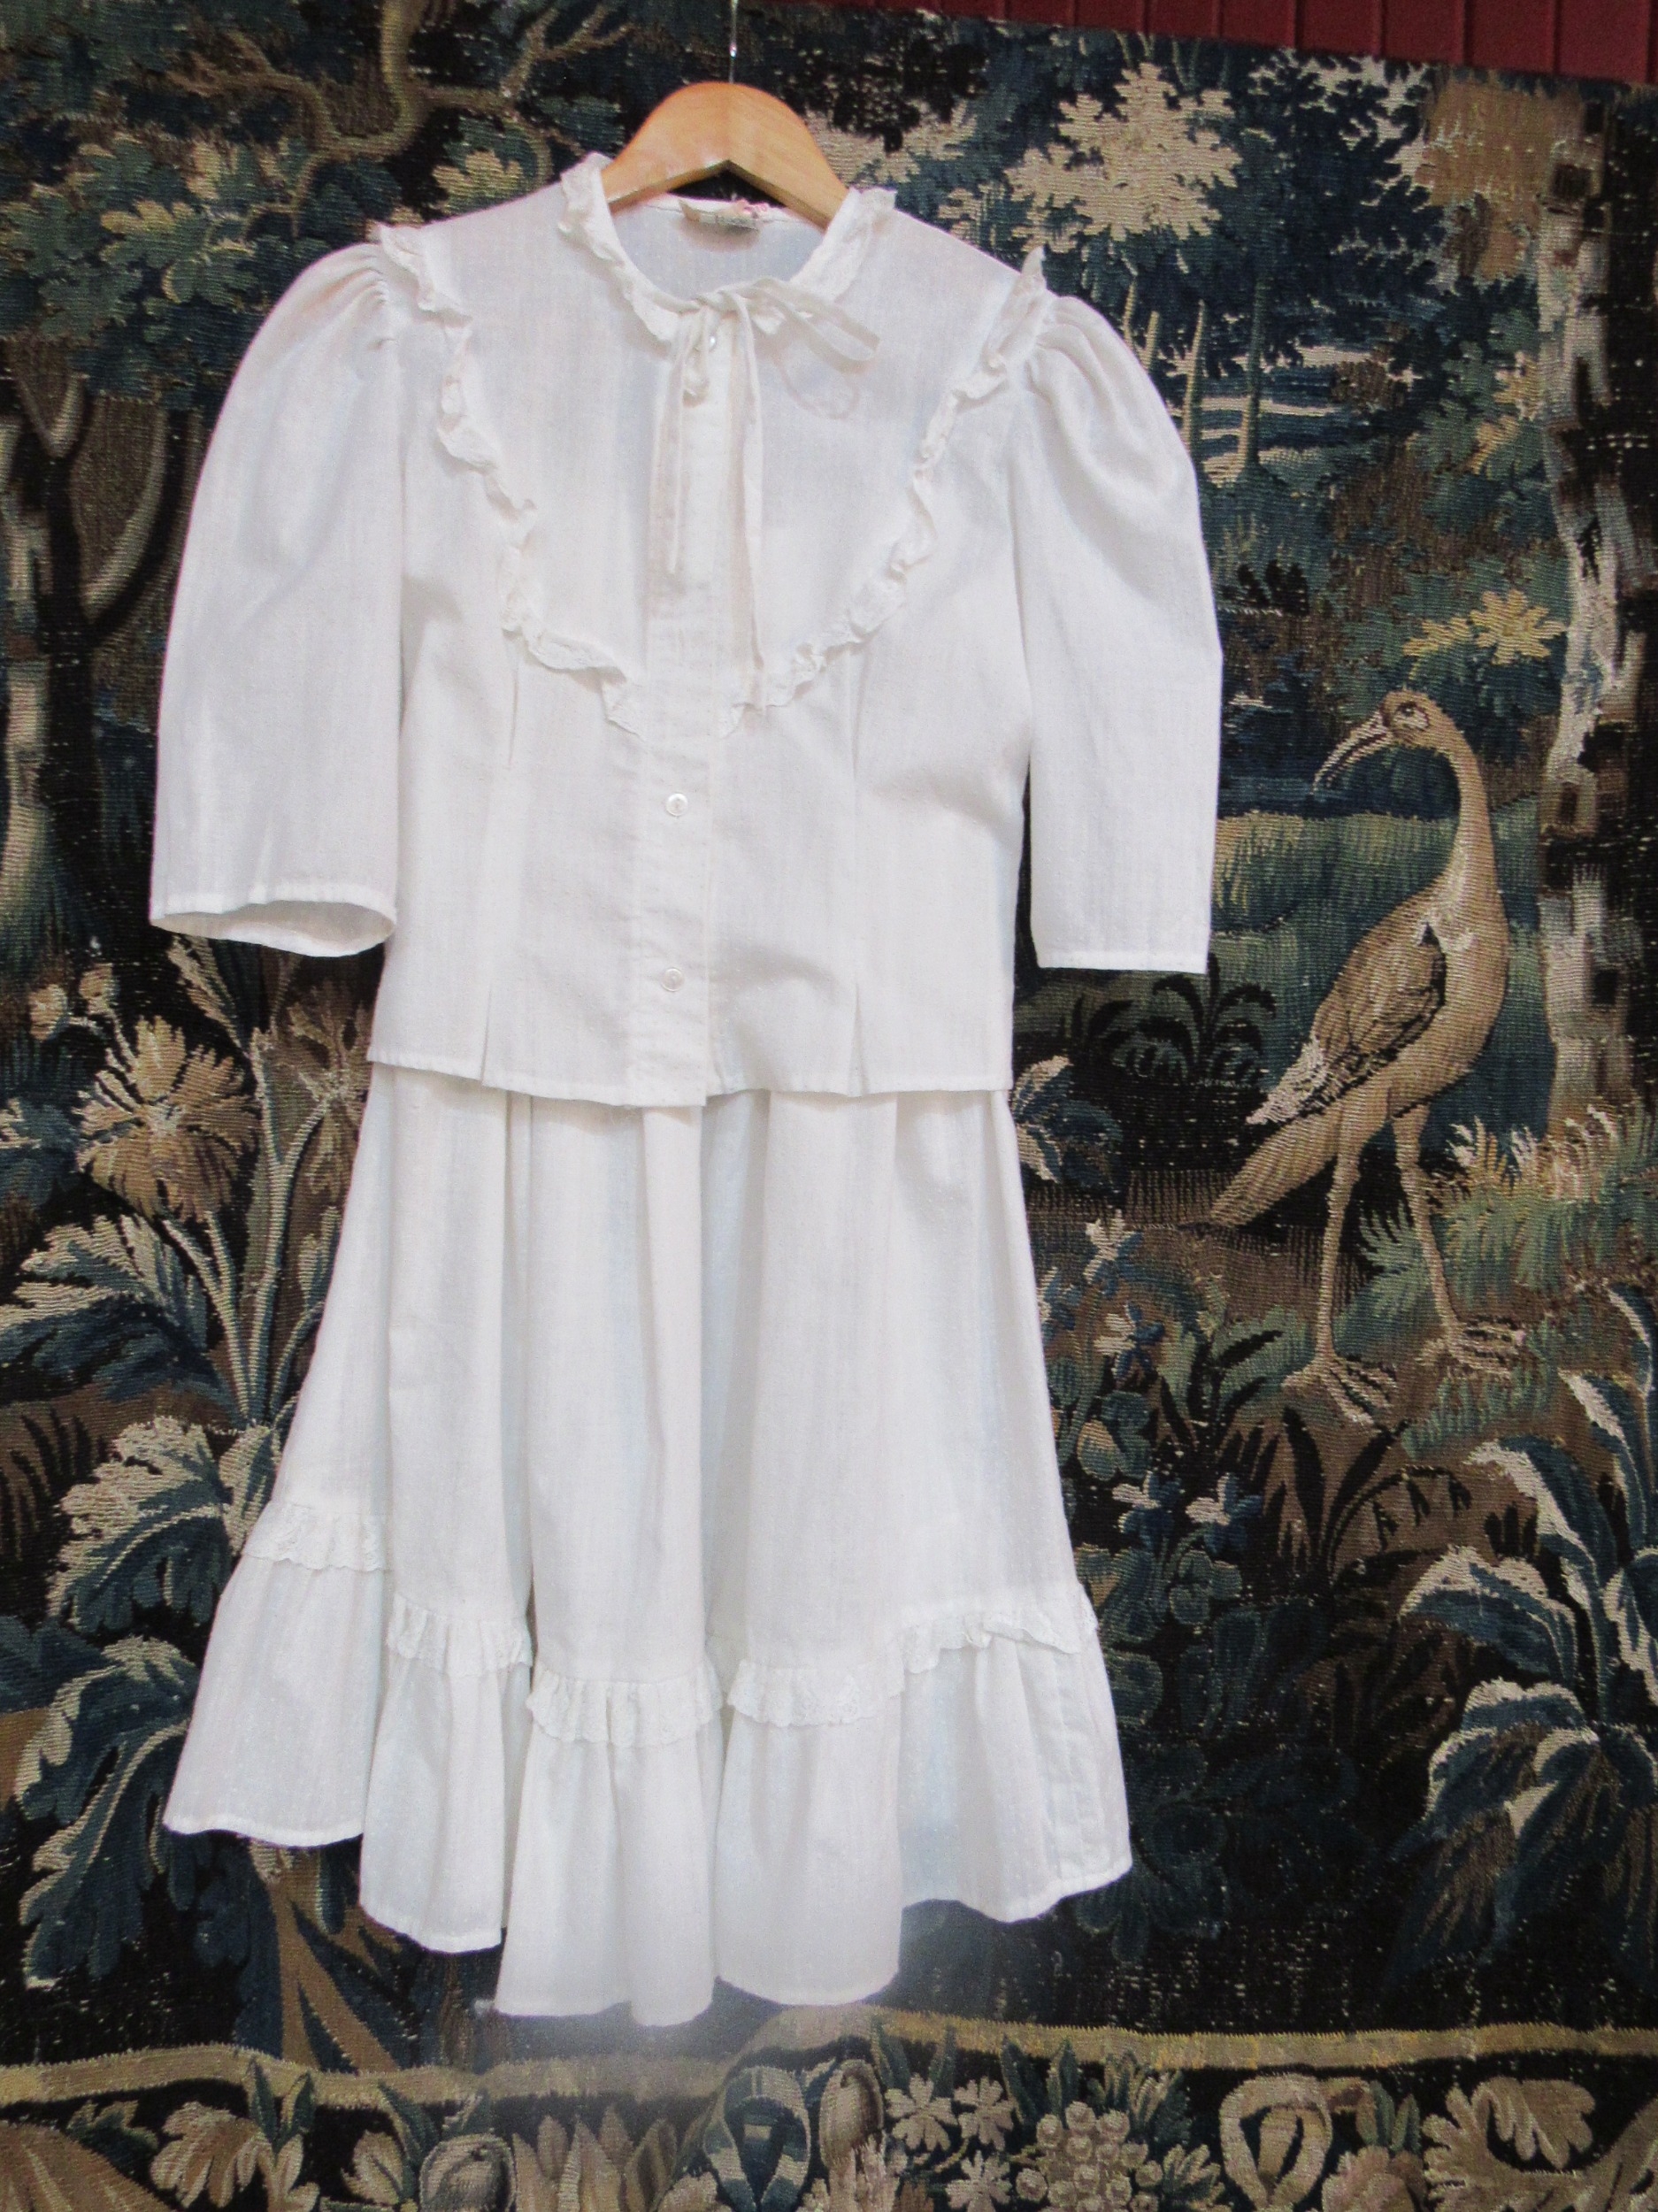 A Monix two piece white blouse and skirt